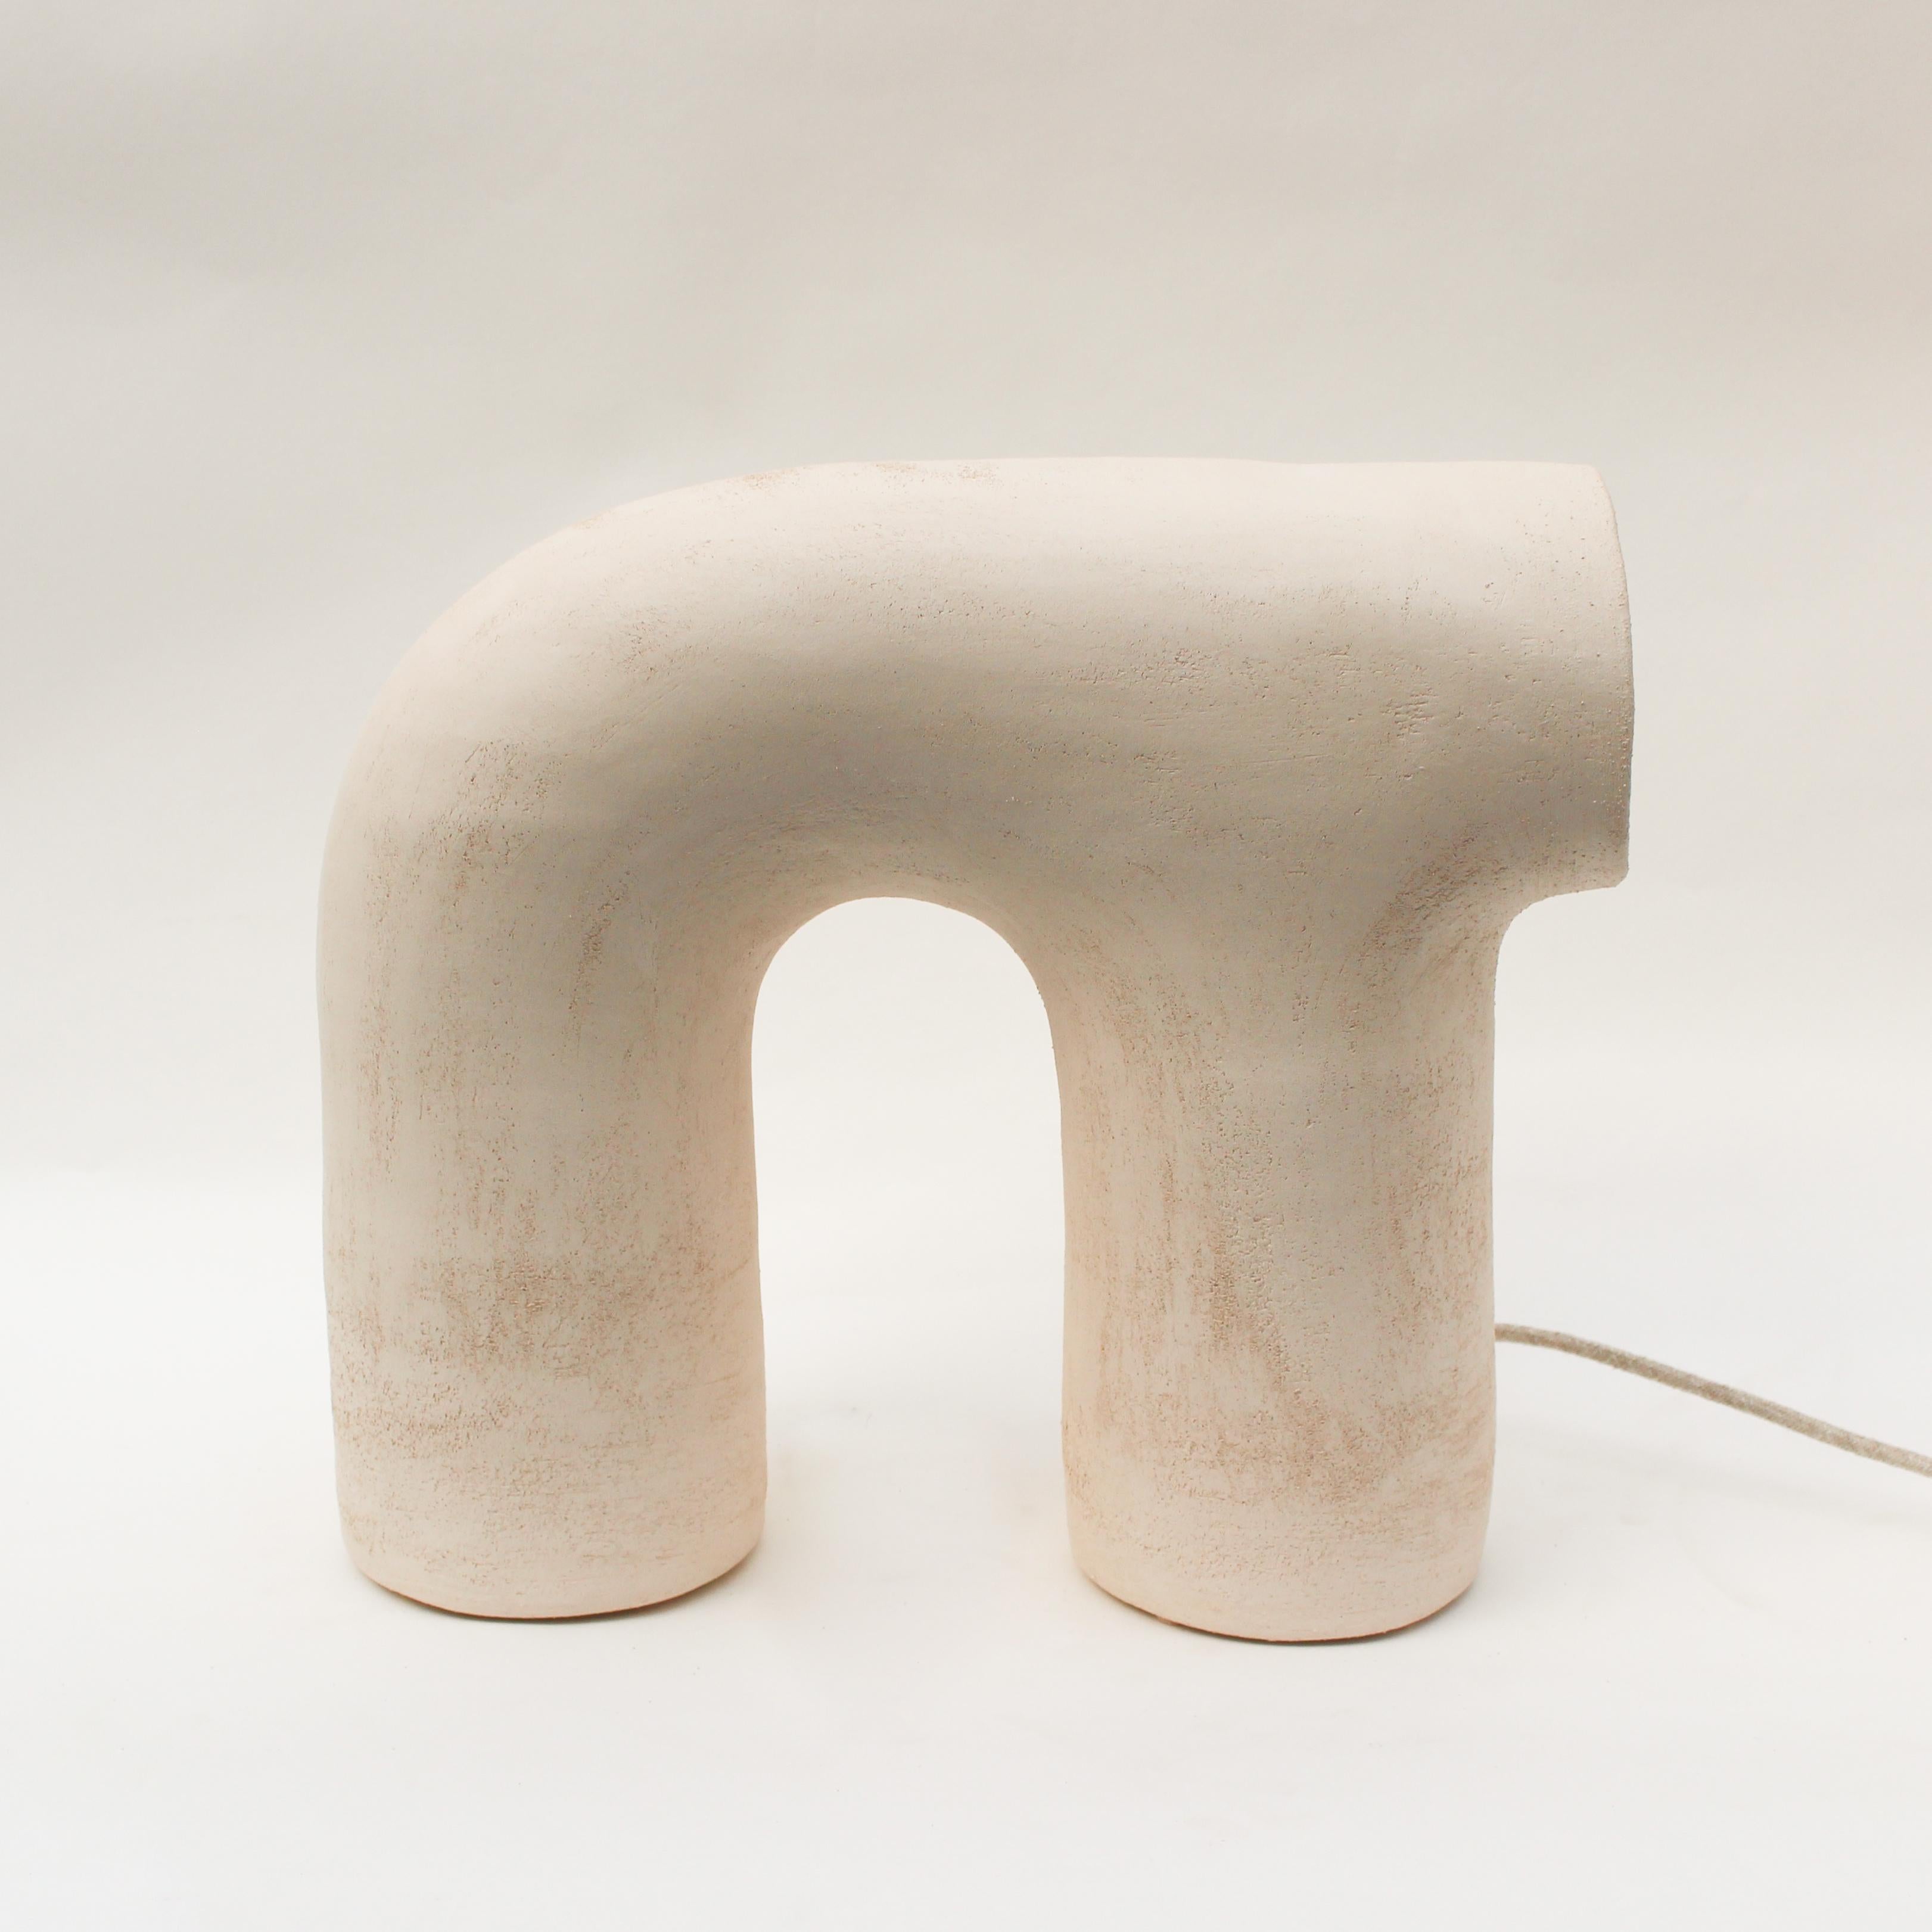 Arche #3 White Stoneware Lamp by Elisa Uberti
Dimensions: D35 x W23 x H35 cm
Materials: Stoneware
Also available in: white/pinck or black Stoneware.

All our lamps can be wired according to each country. If sold to the USA it will be wired for